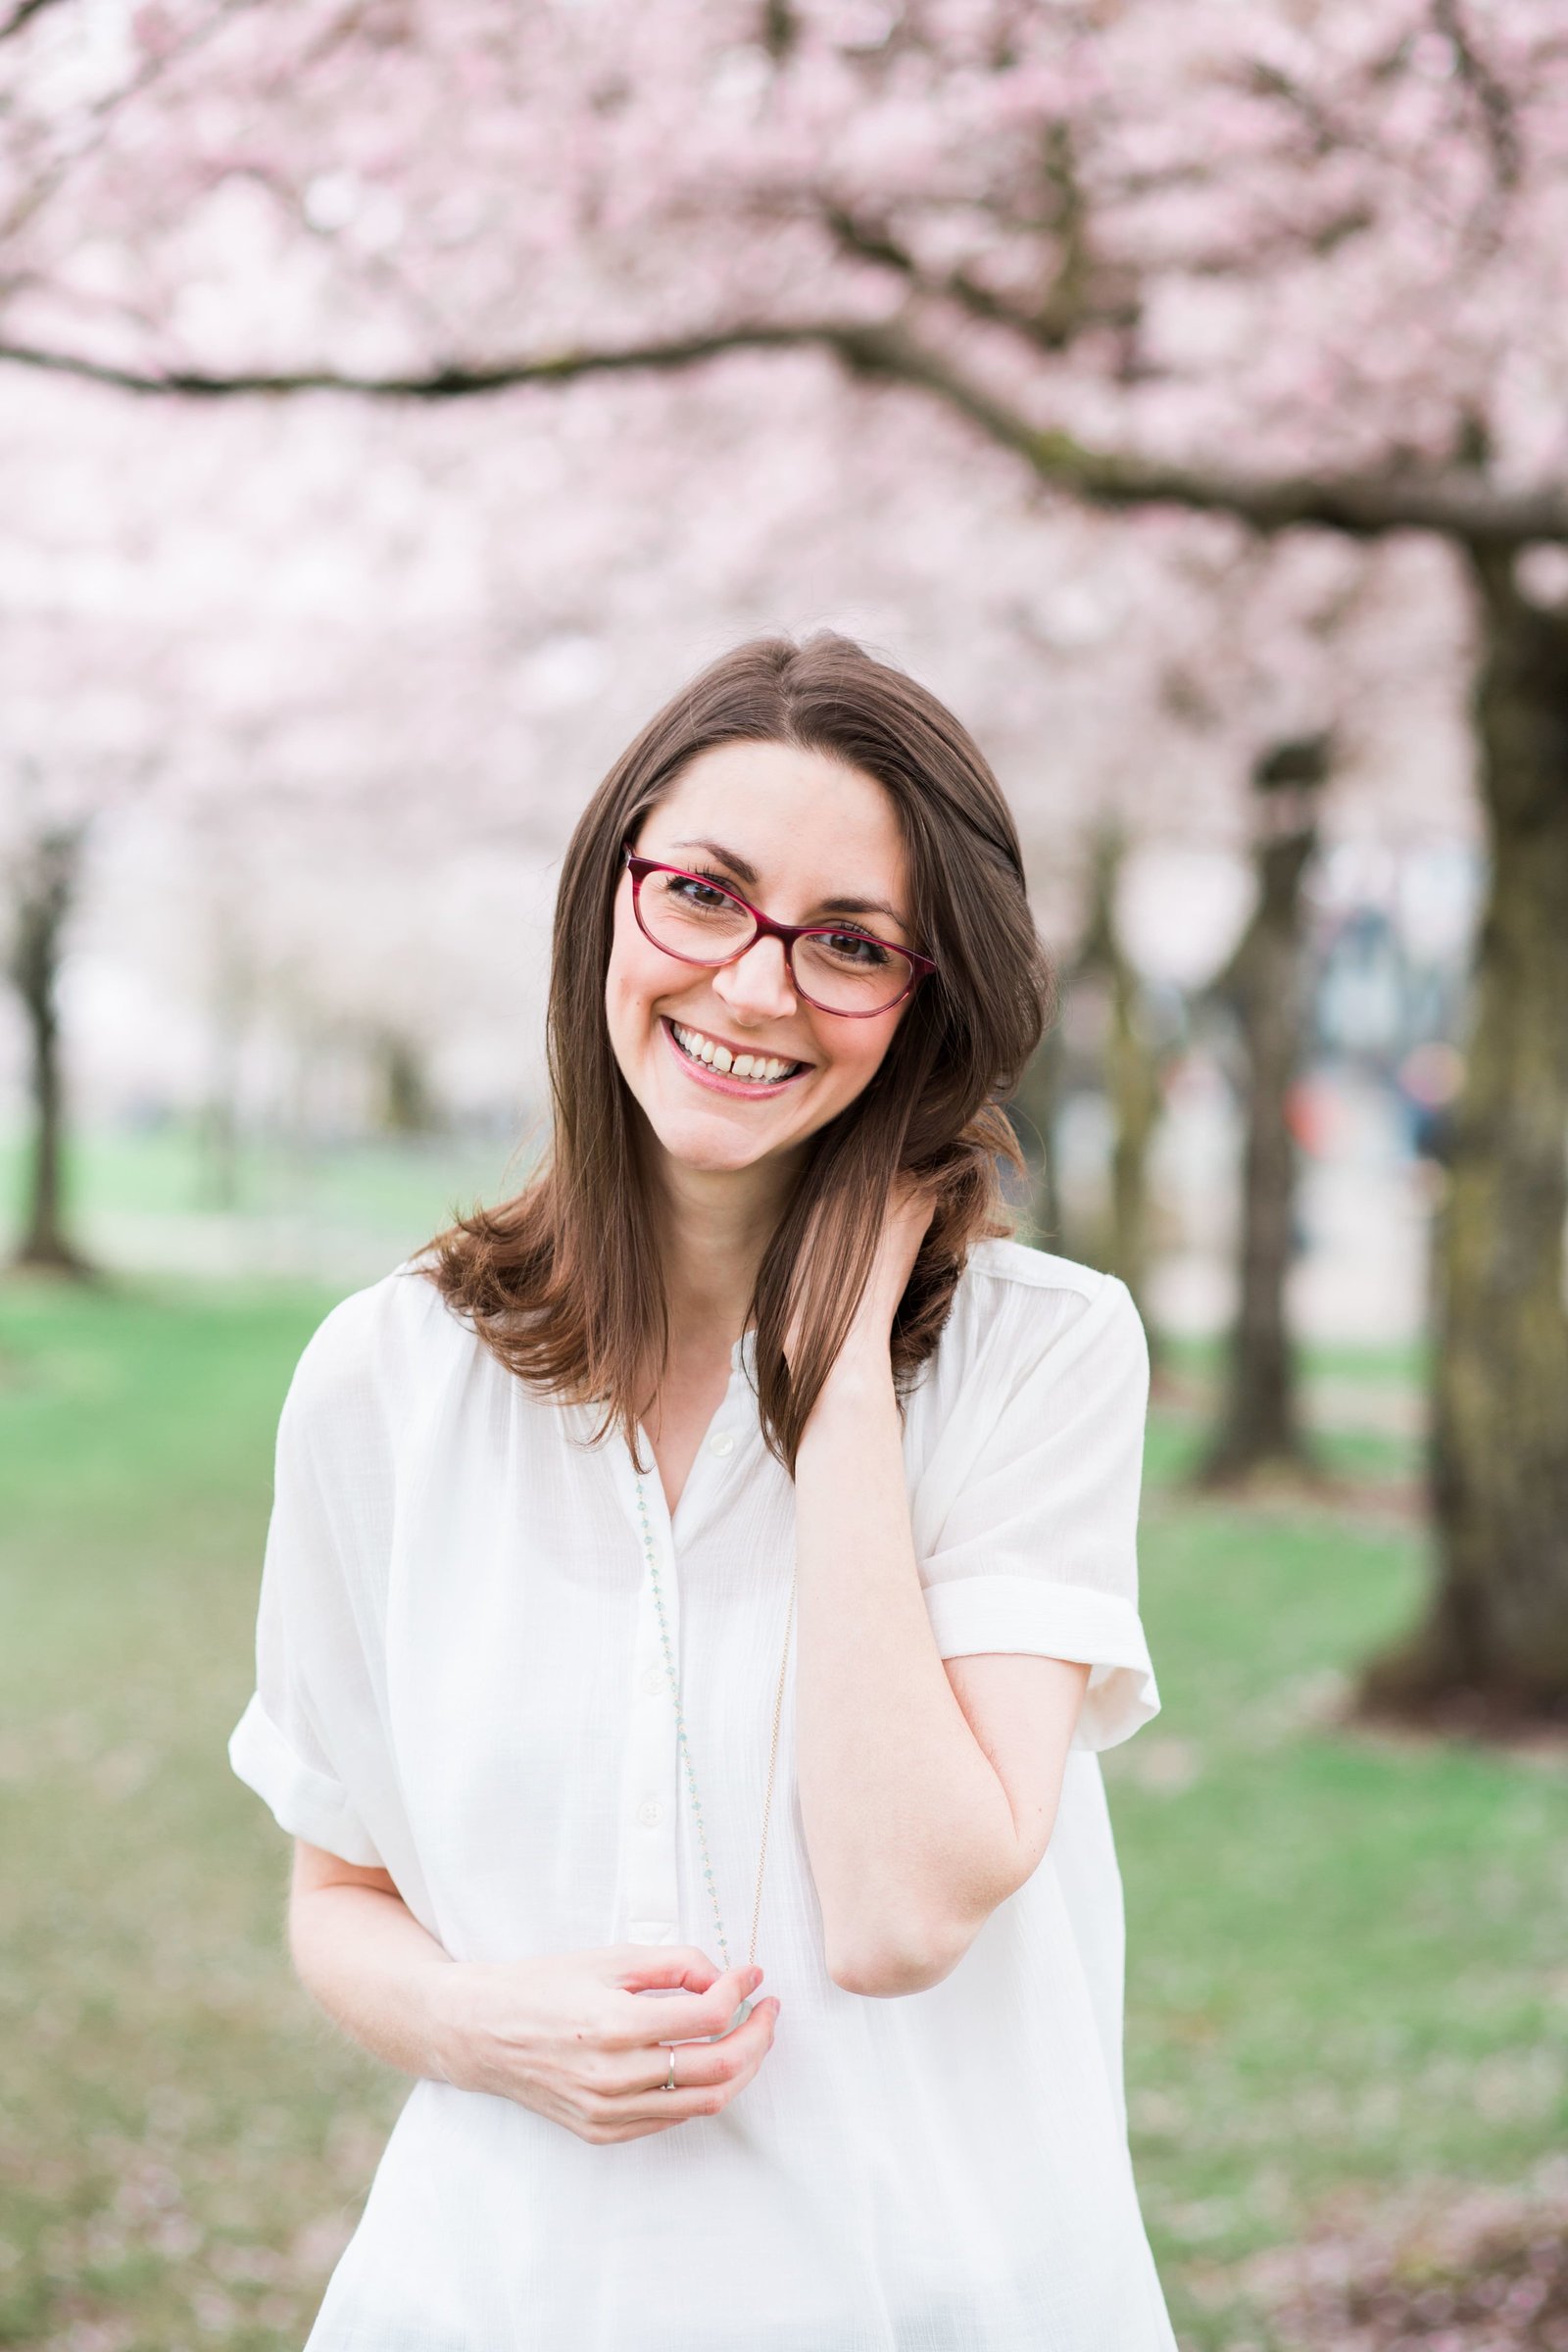 Personal brand photography with cherry blossoms at Portland waterfront